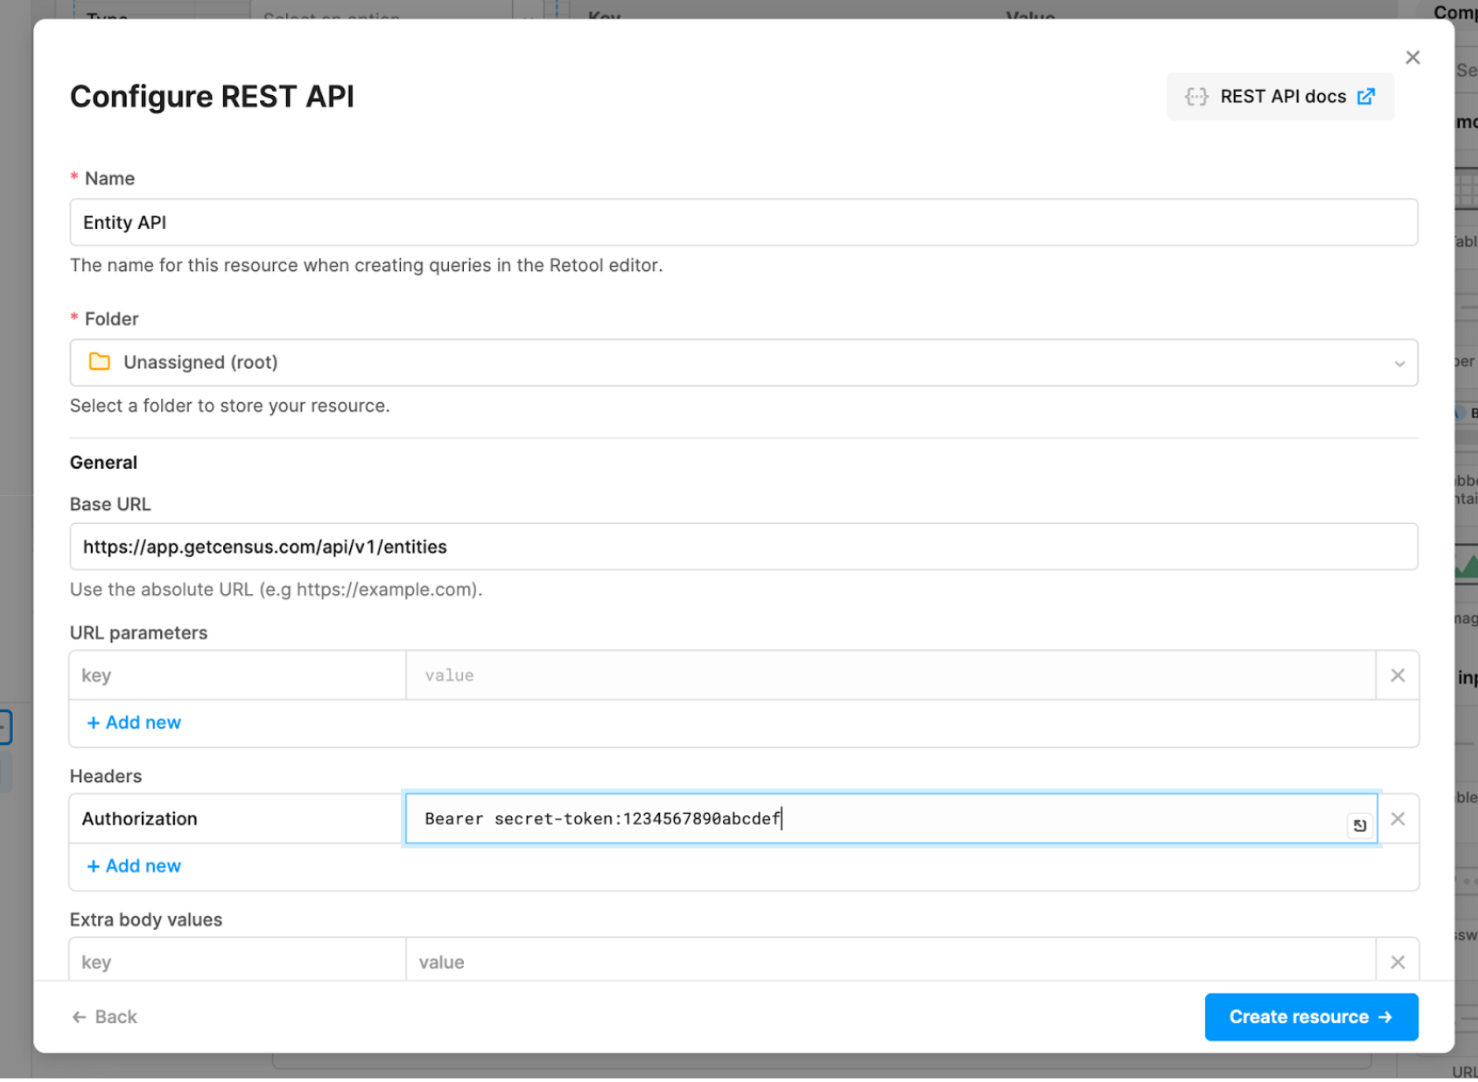 Image of the Configure REST API screen in the UI.